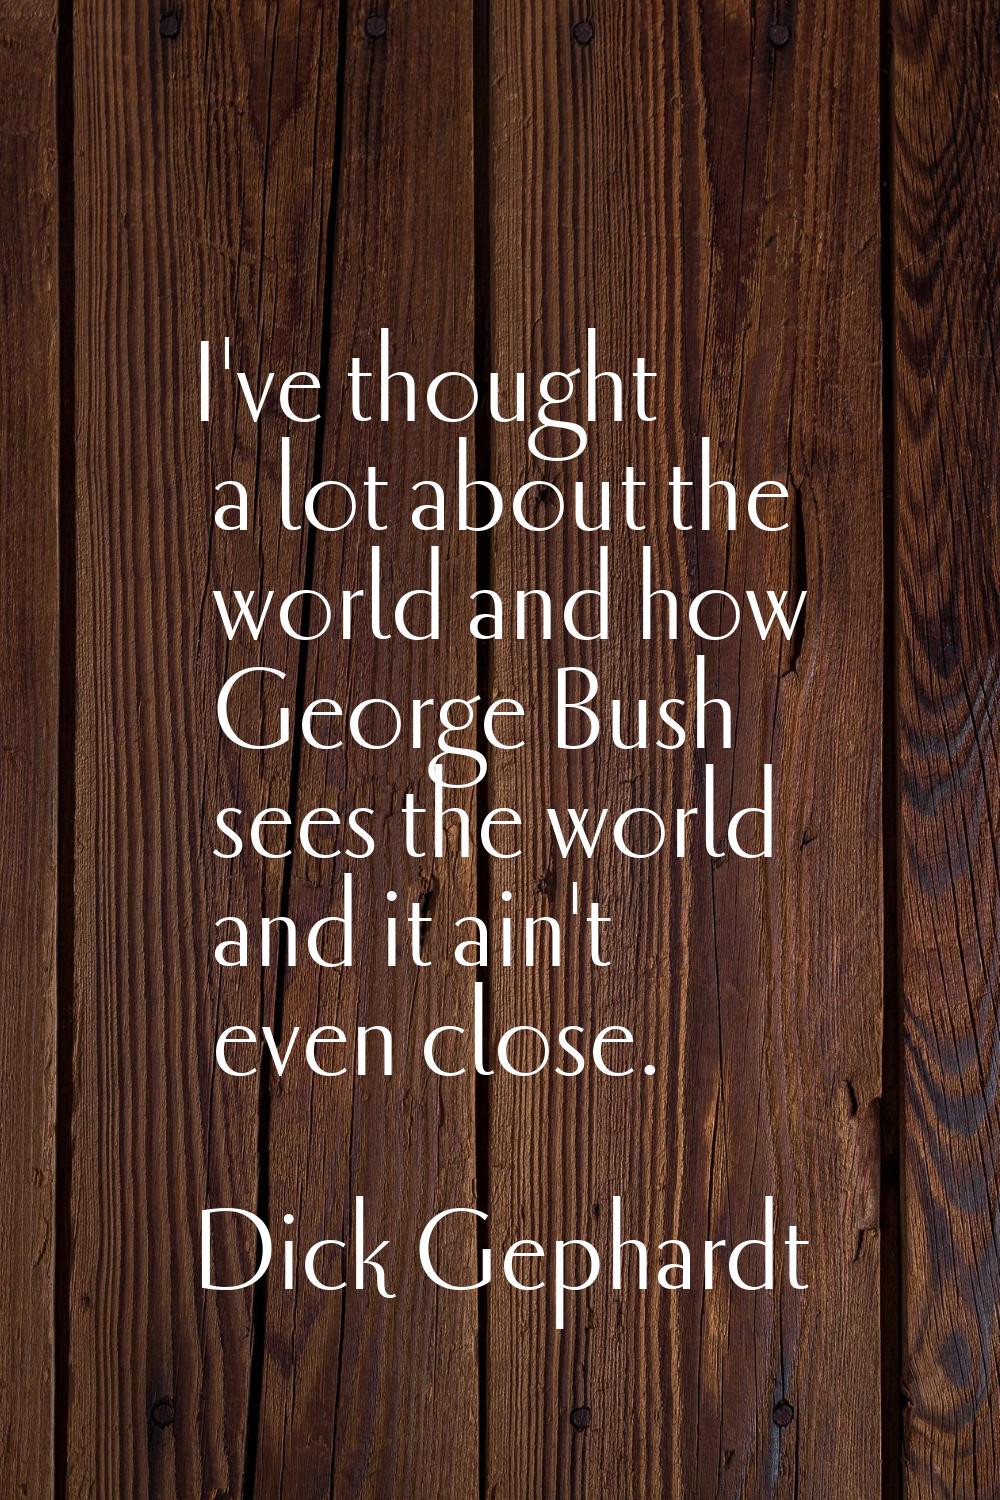 I've thought a lot about the world and how George Bush sees the world and it ain't even close.